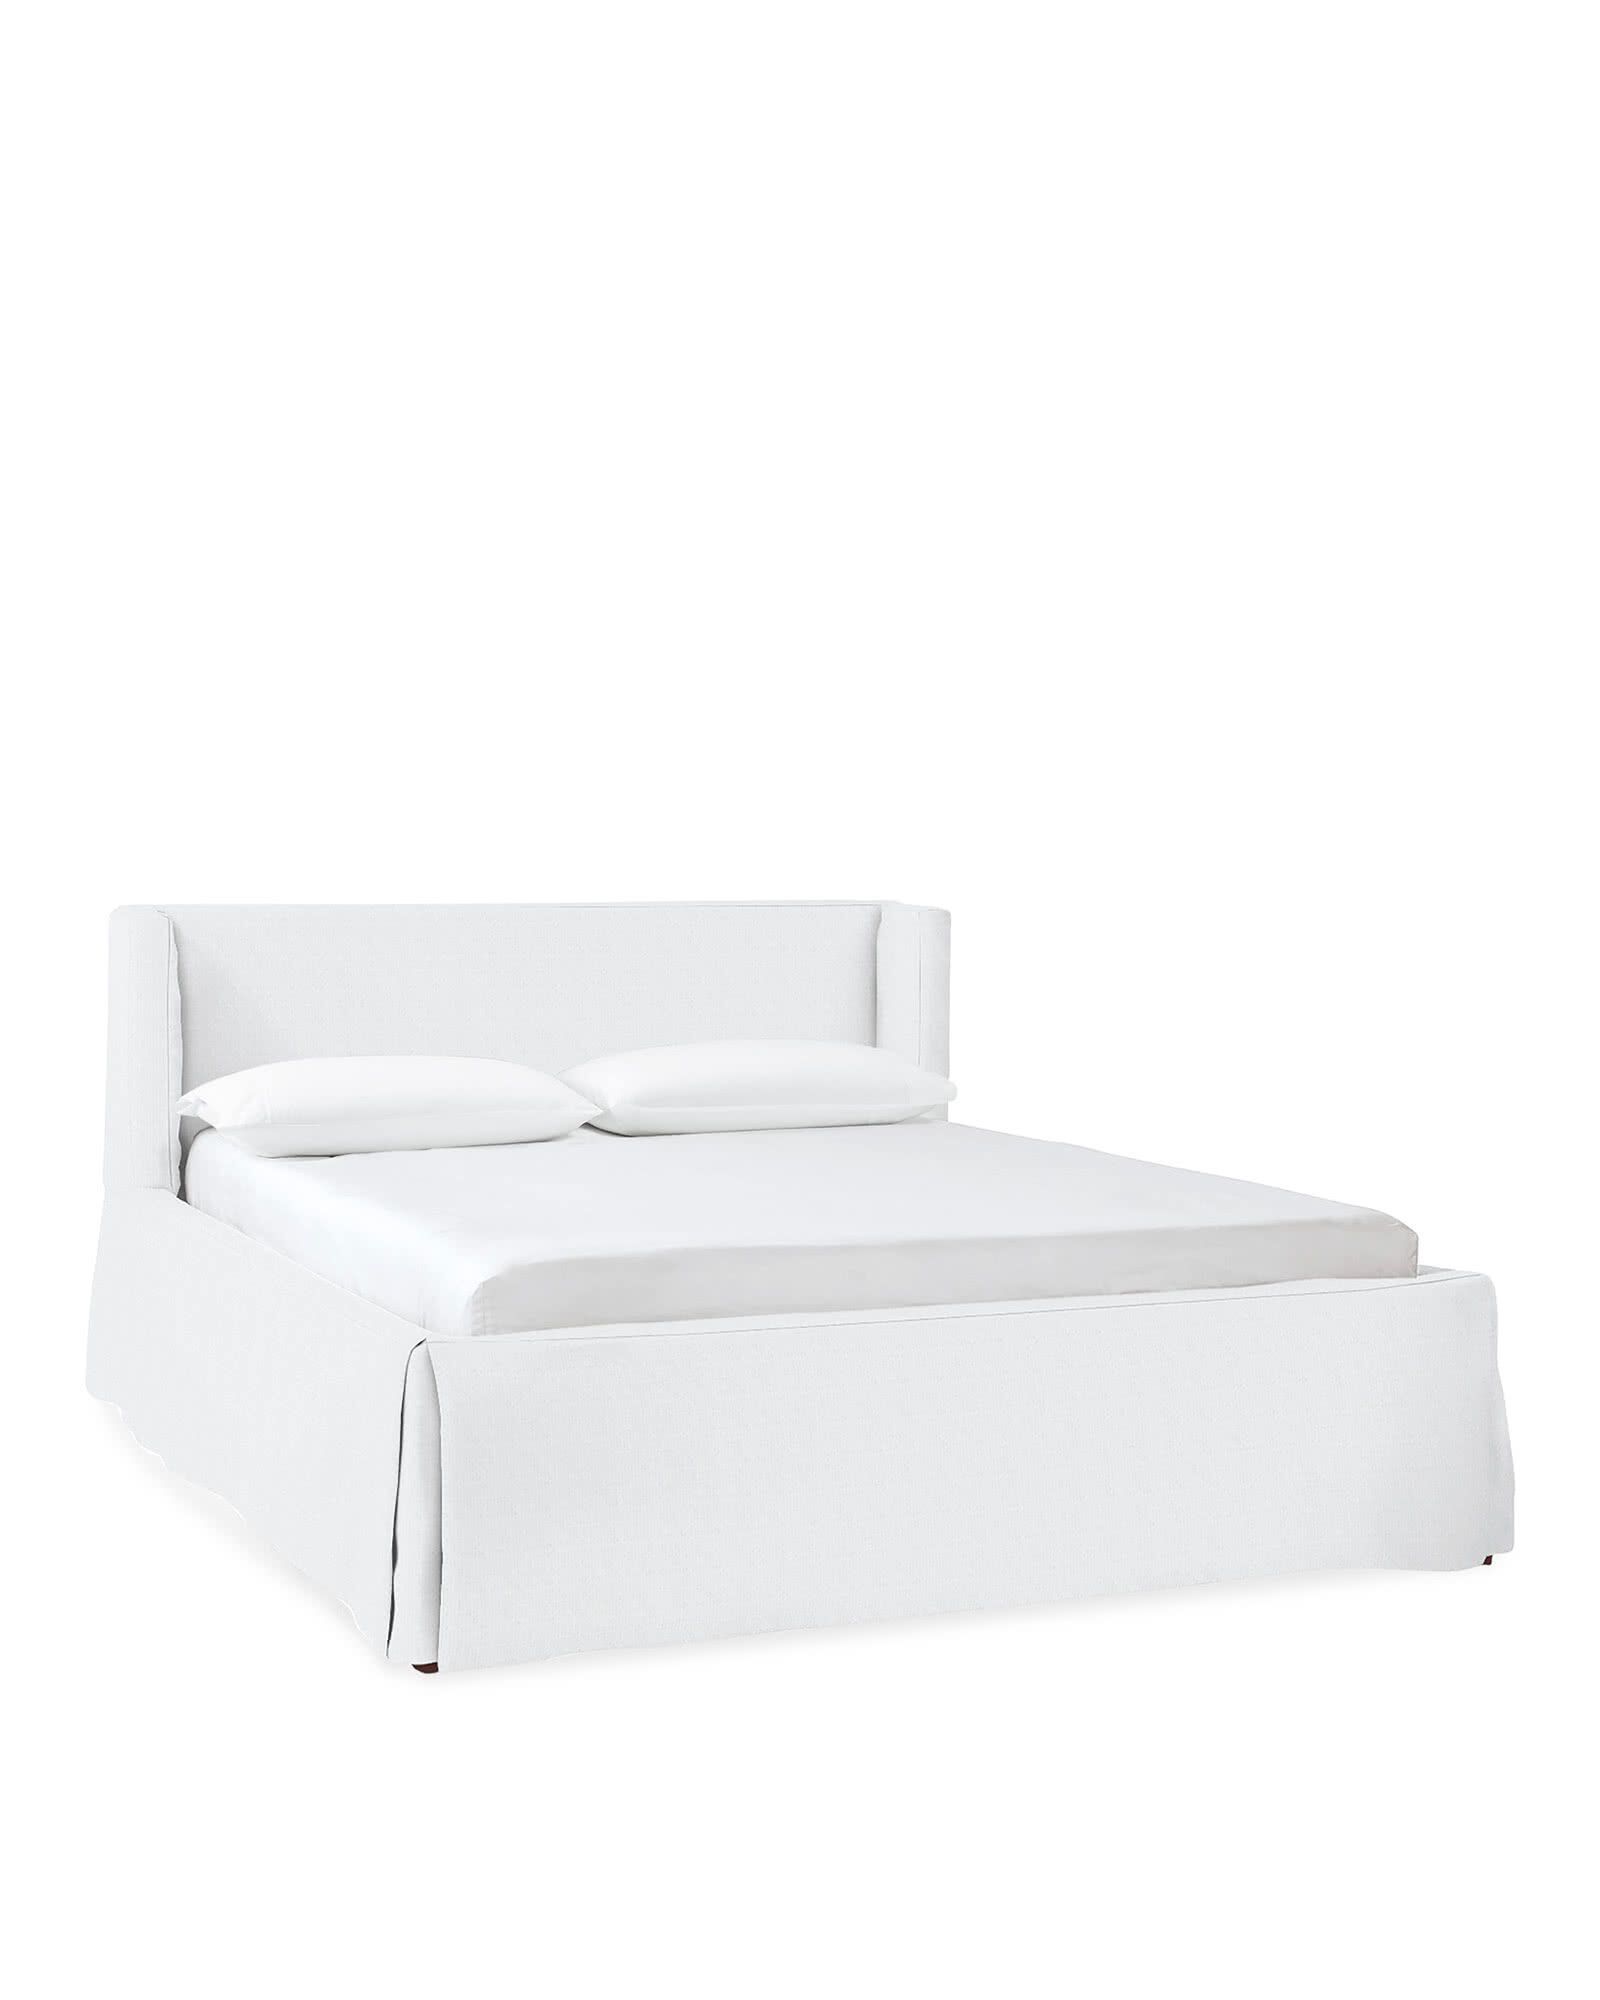 Broderick Slipcovered Bed | Serena and Lily